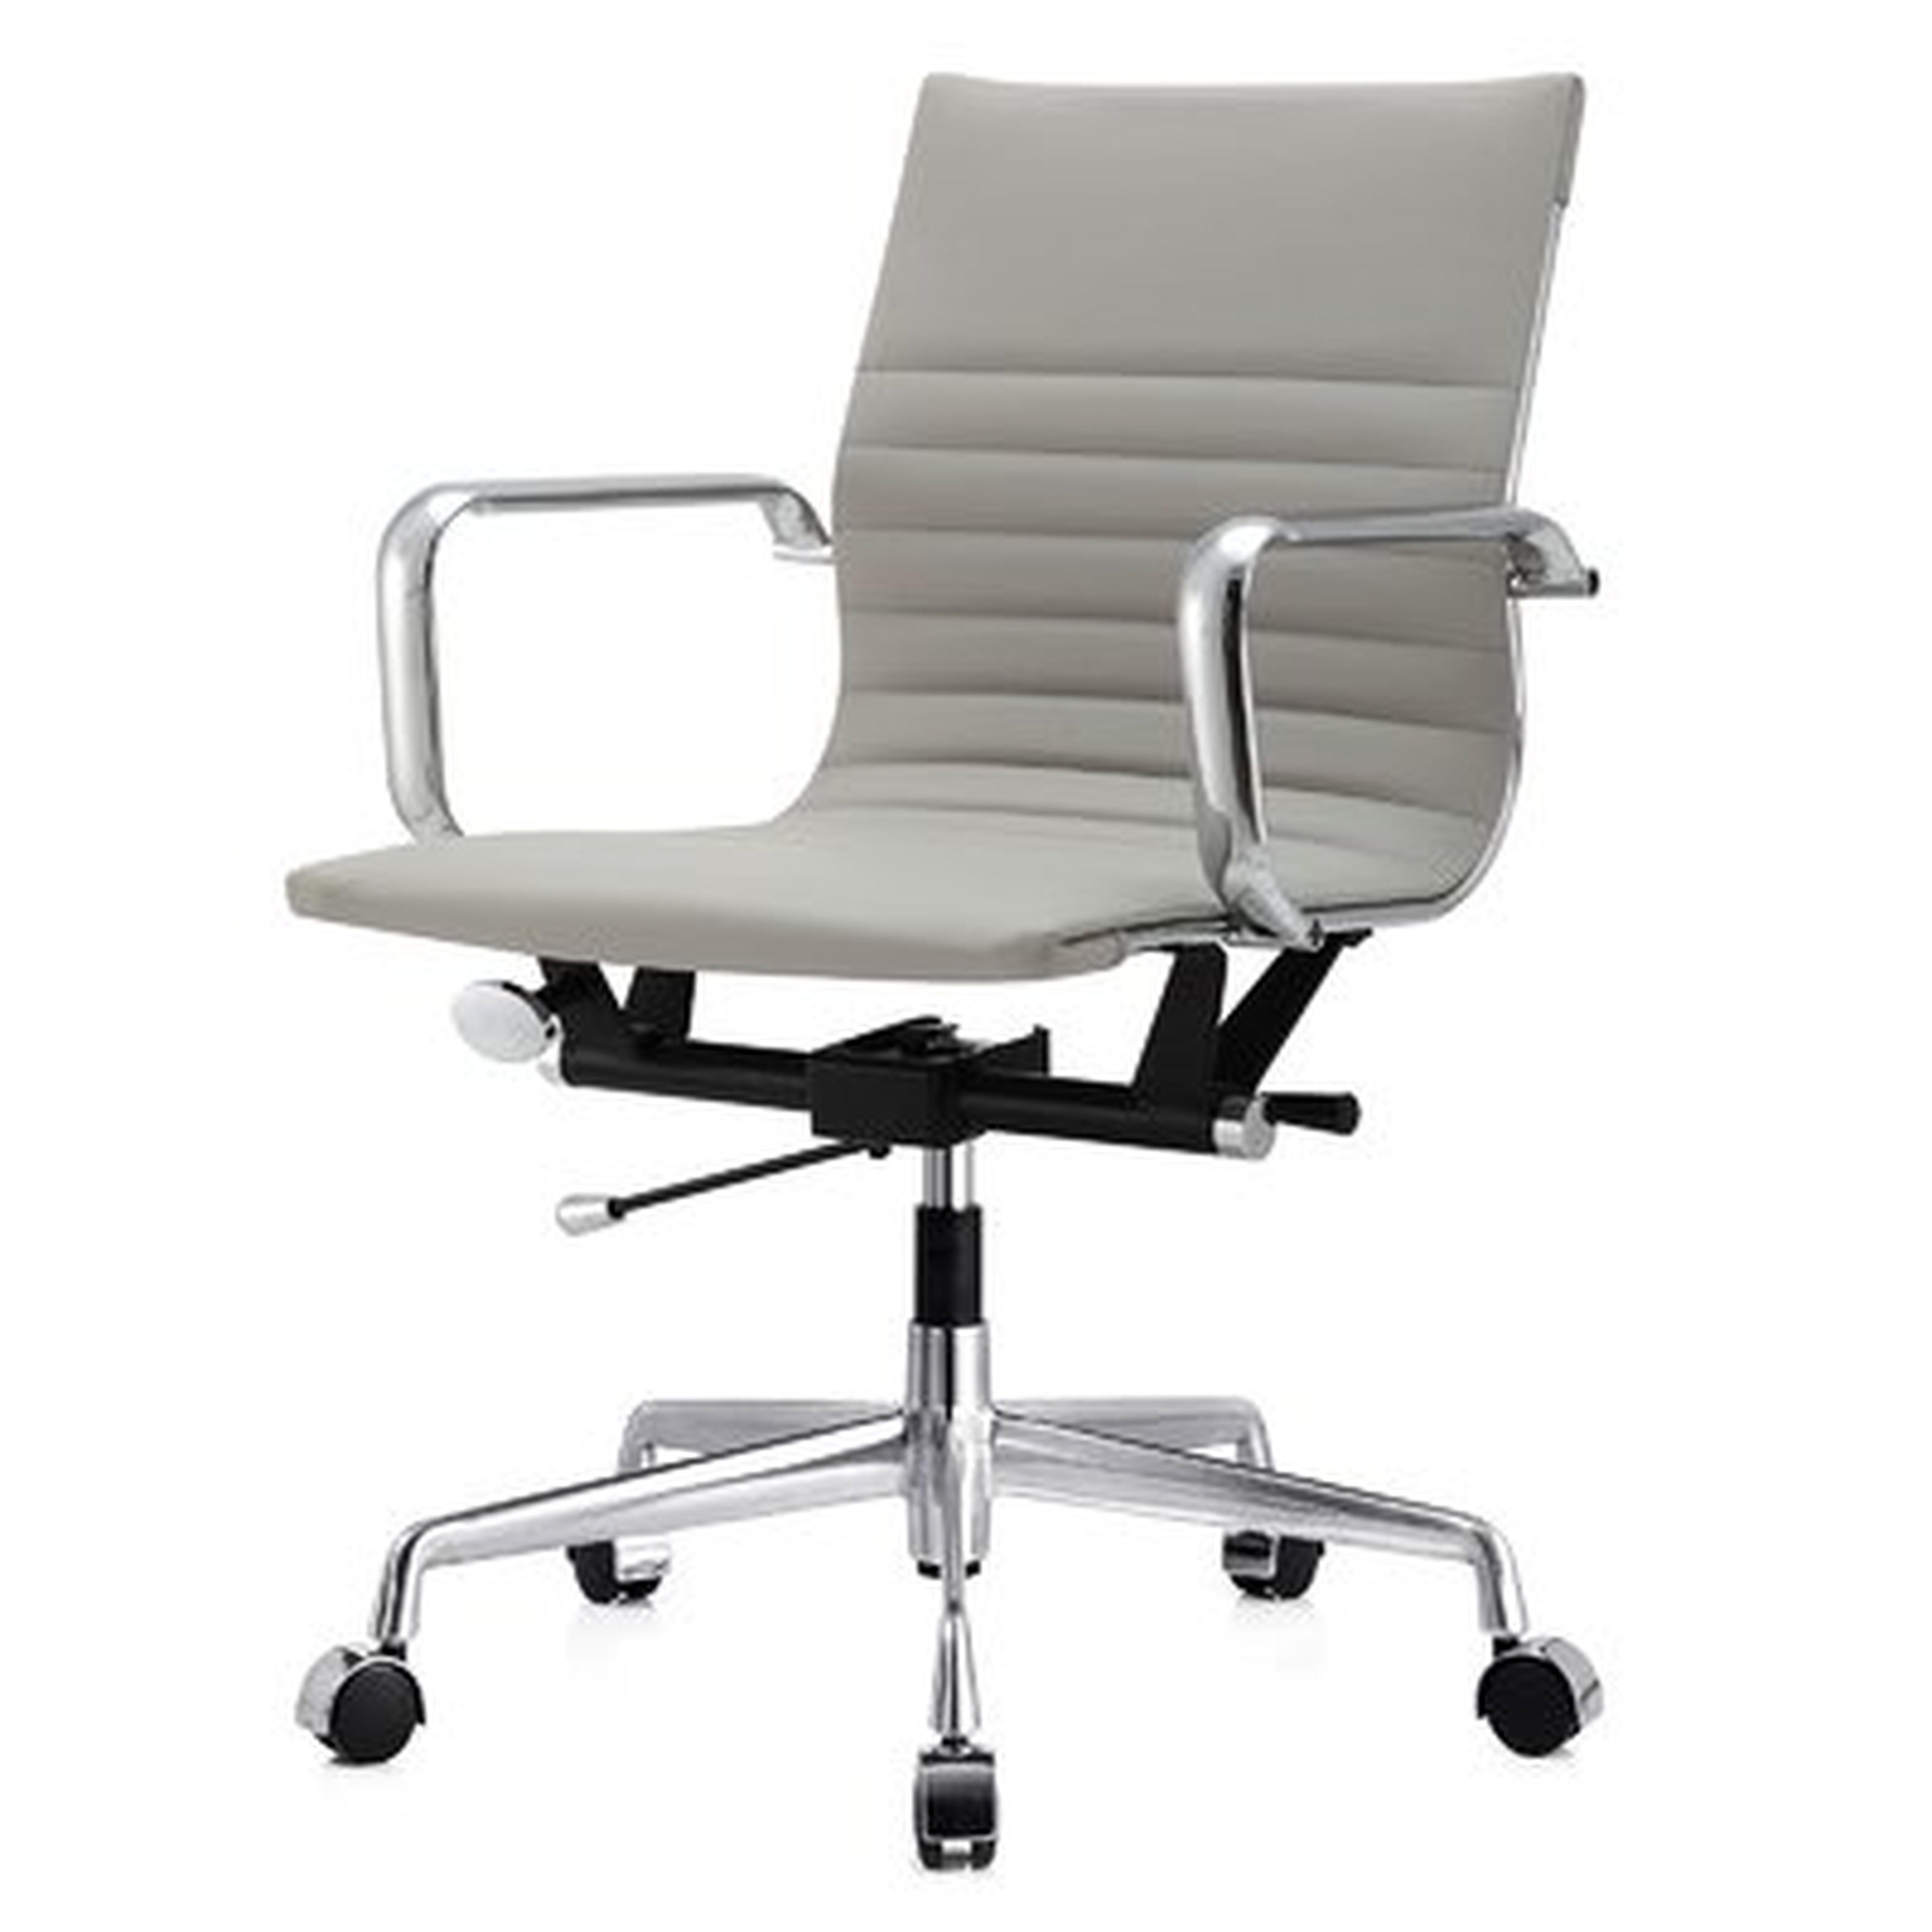 Conference Chair - AllModern